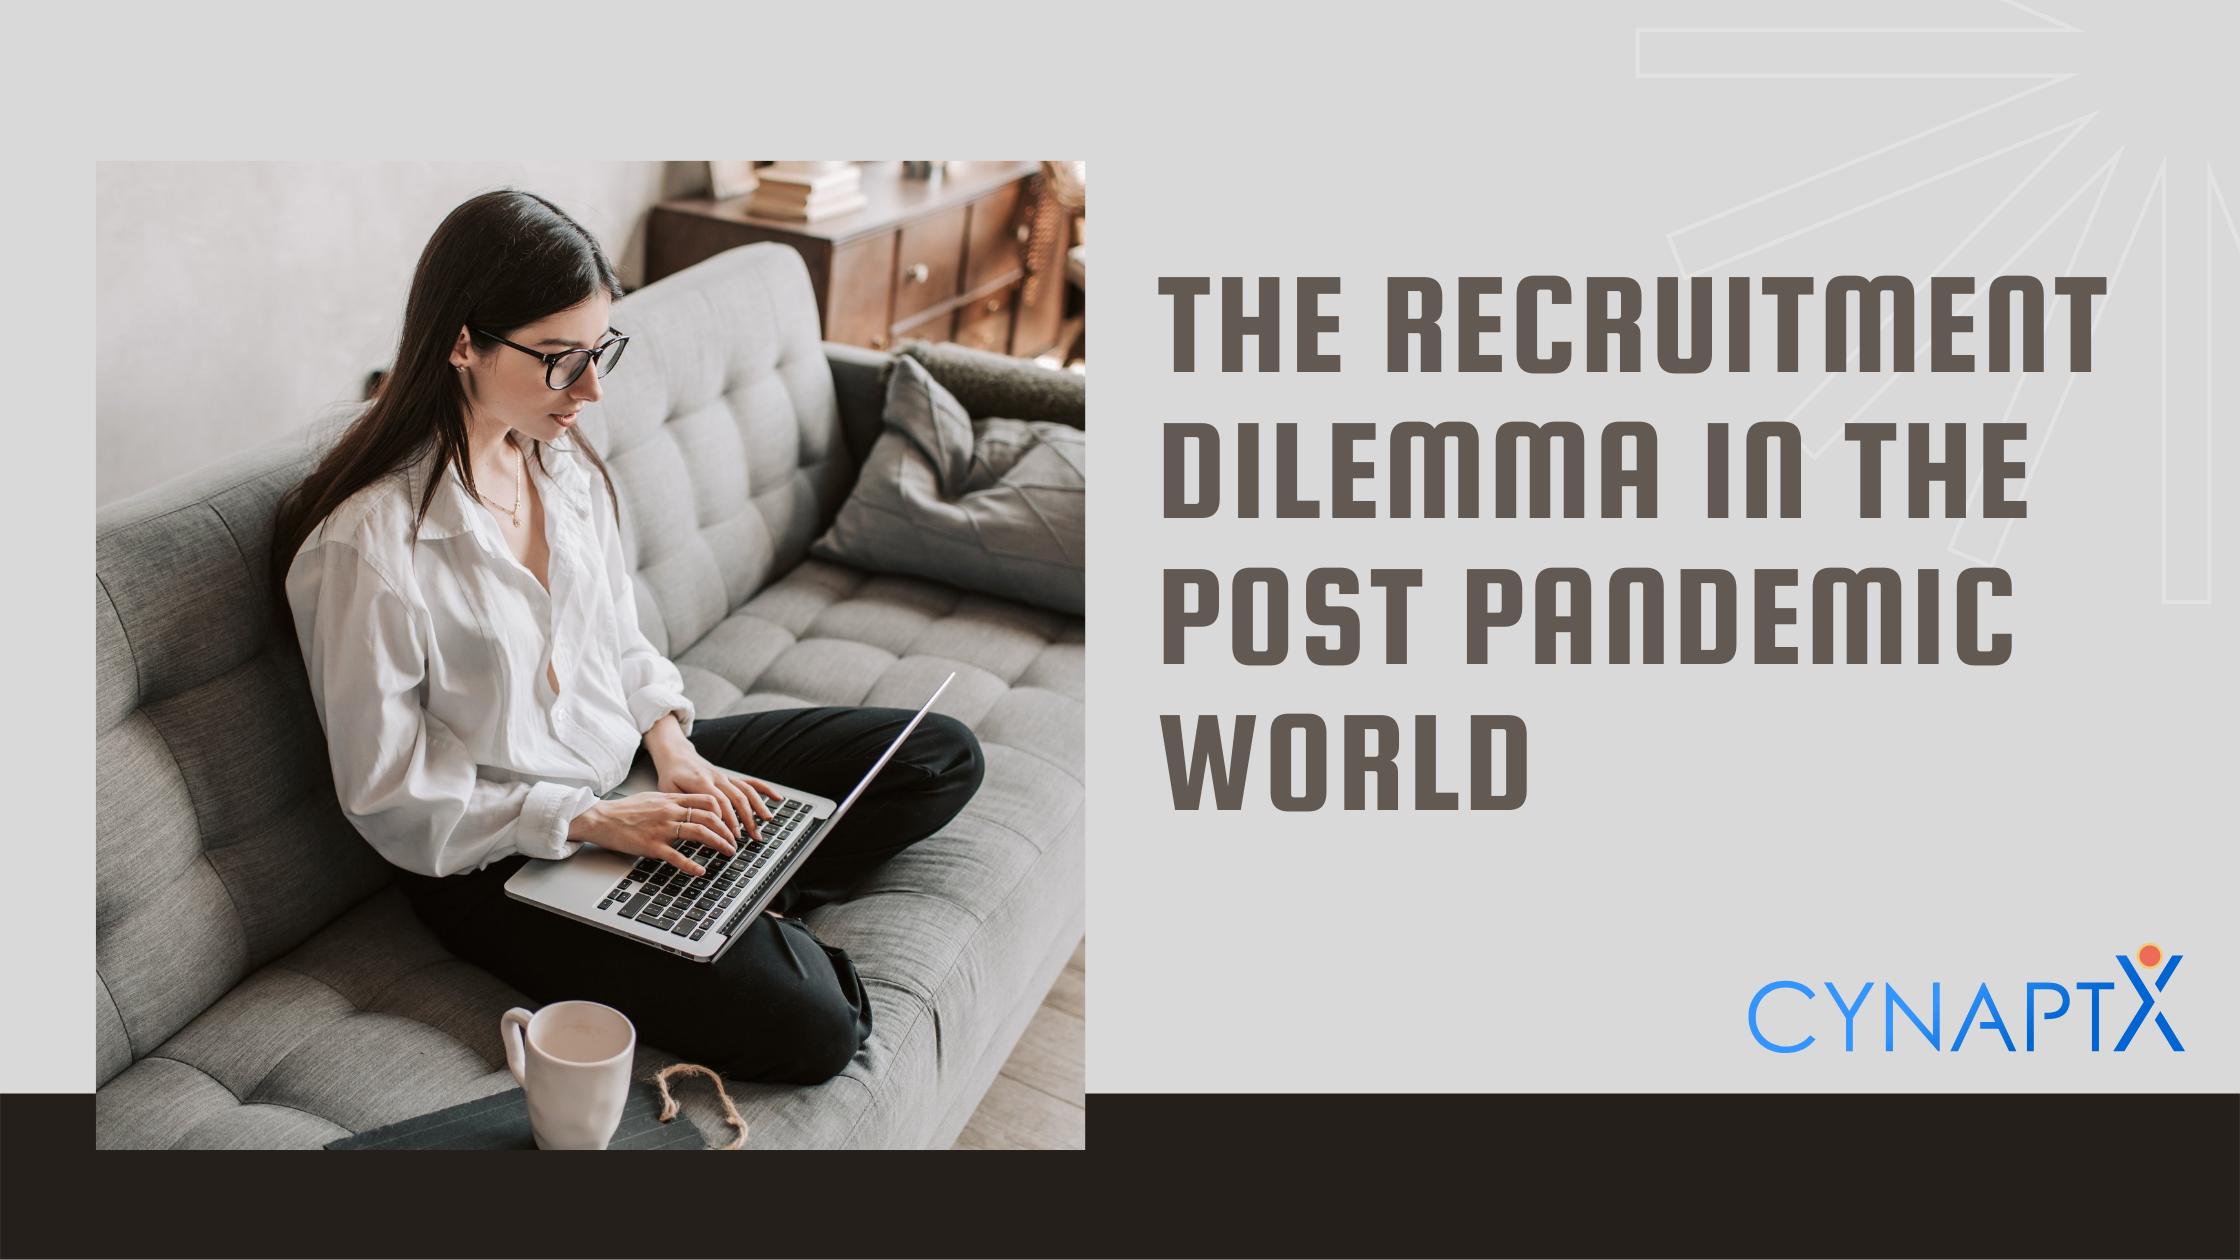 The recruitment dilemma in the post pandemic world (1)